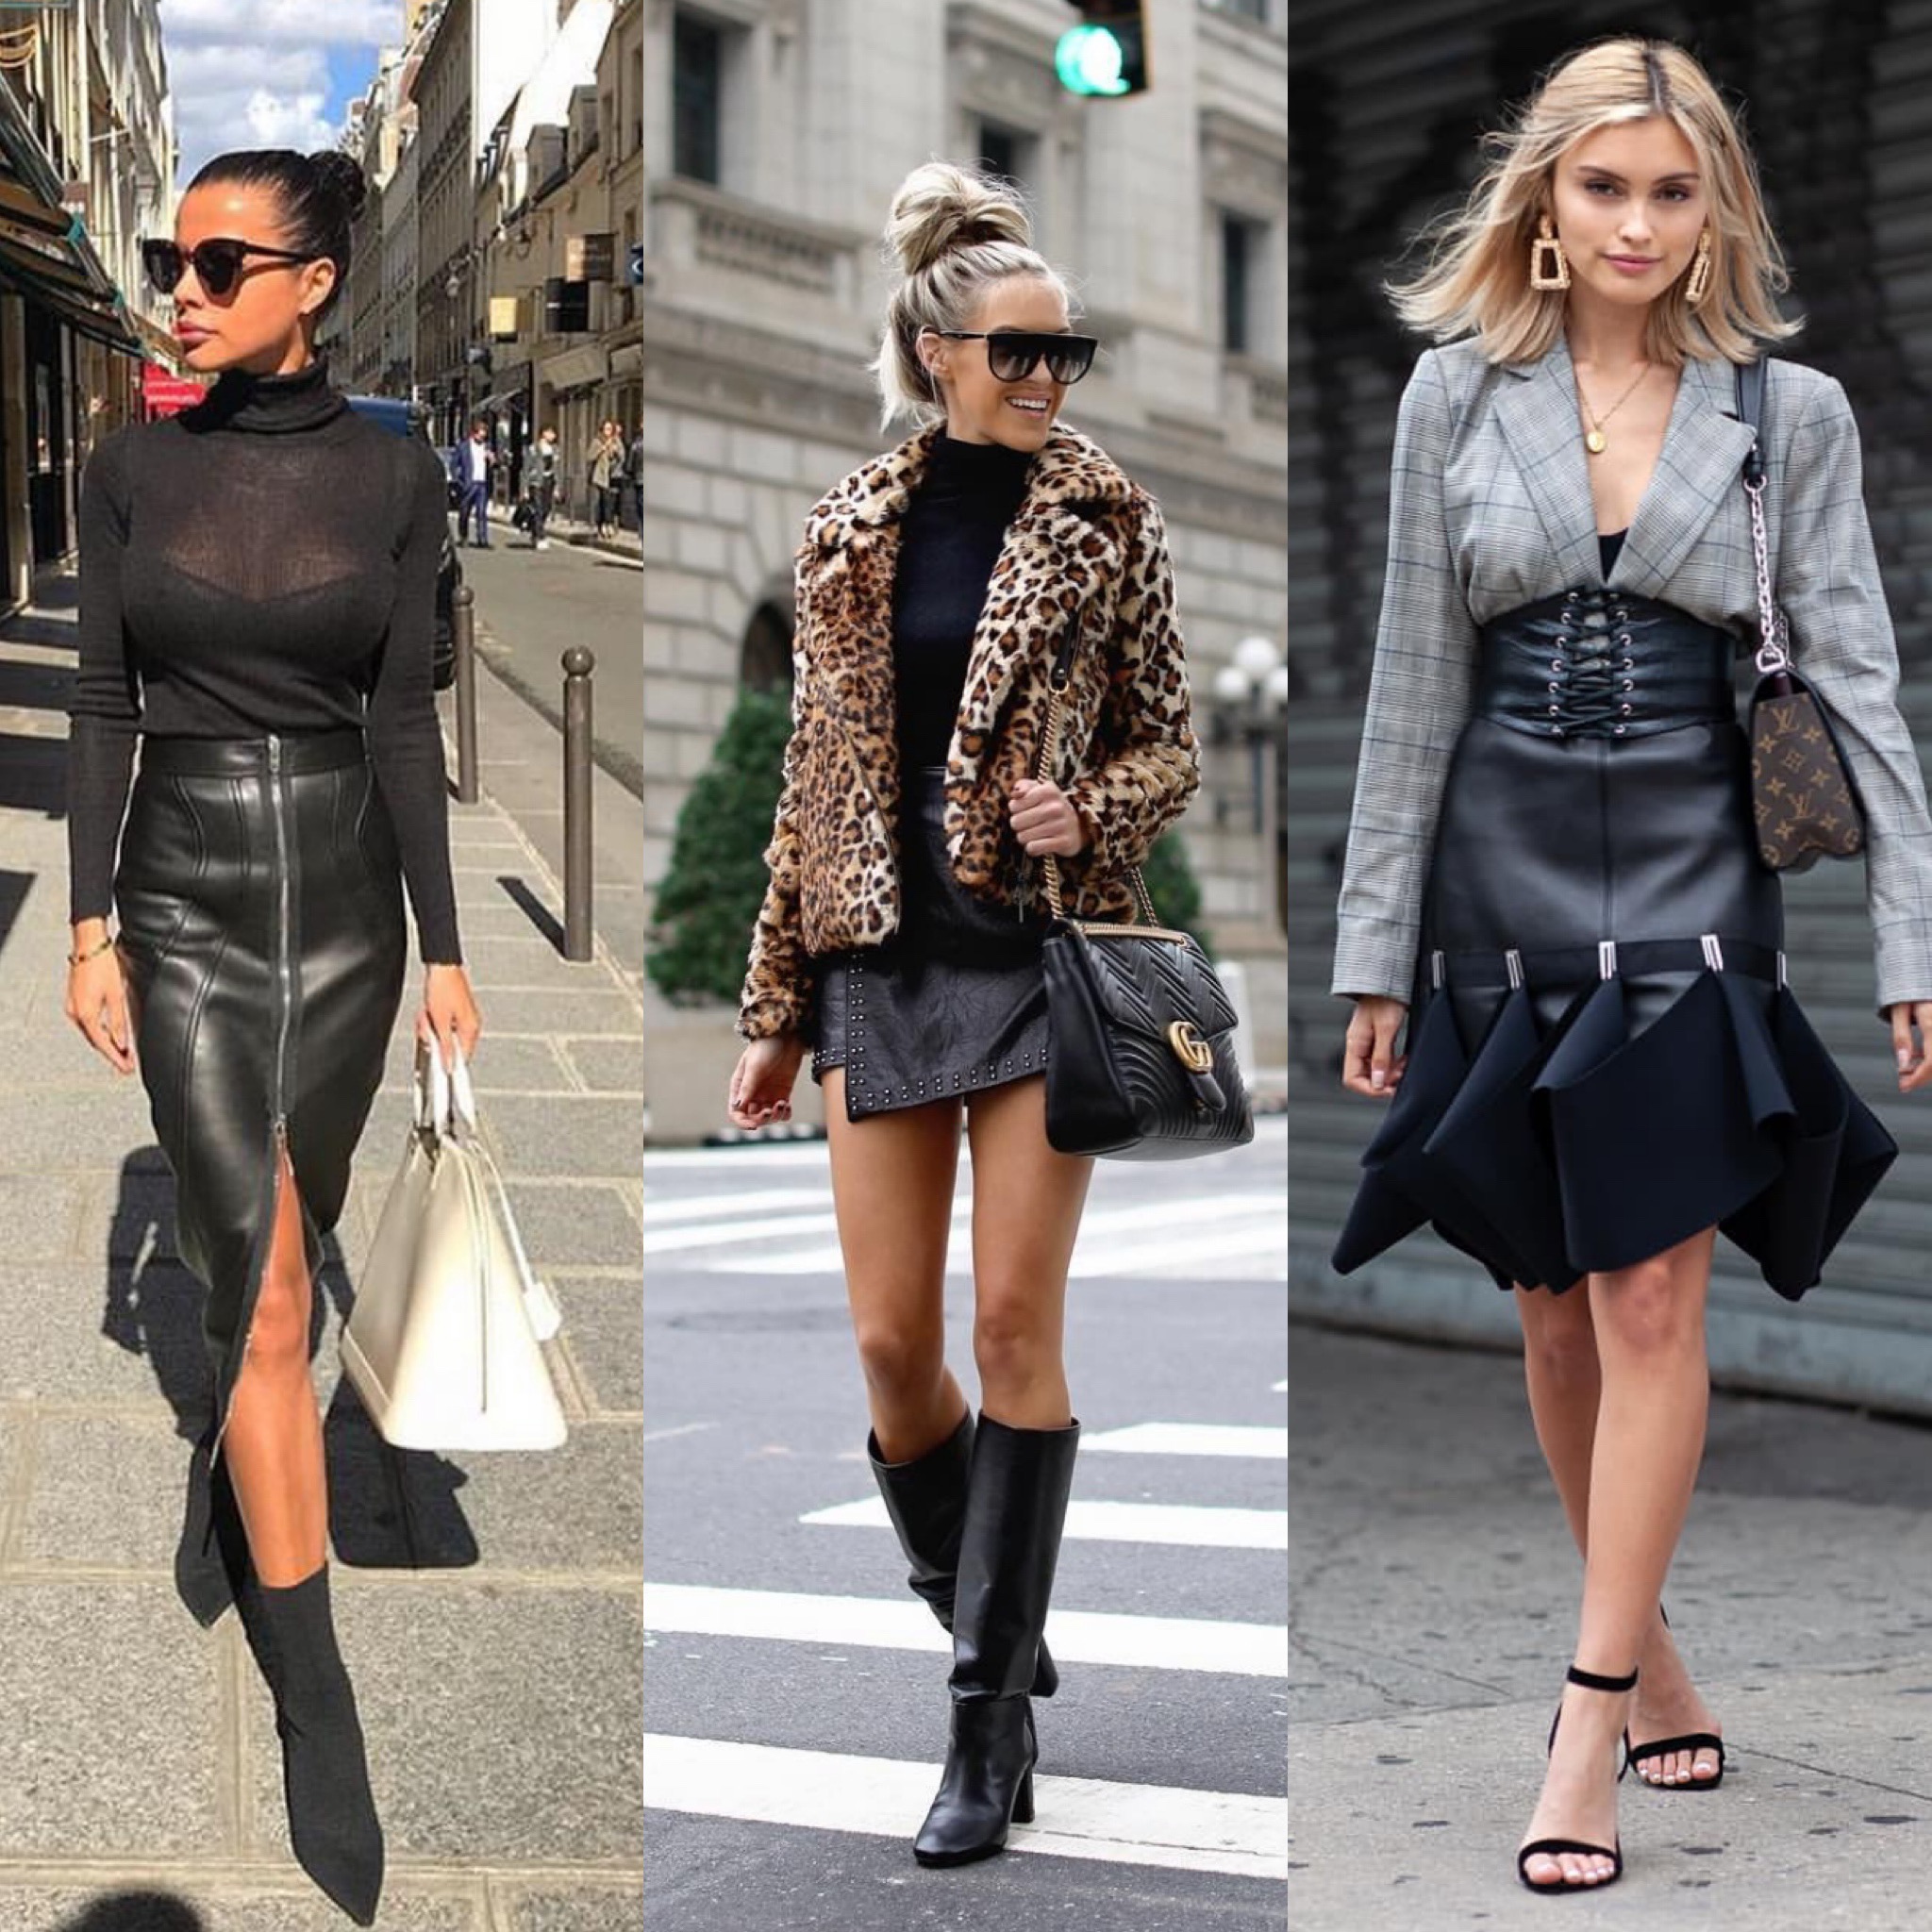 5-Looks-in-5-Minutes-Leather-8